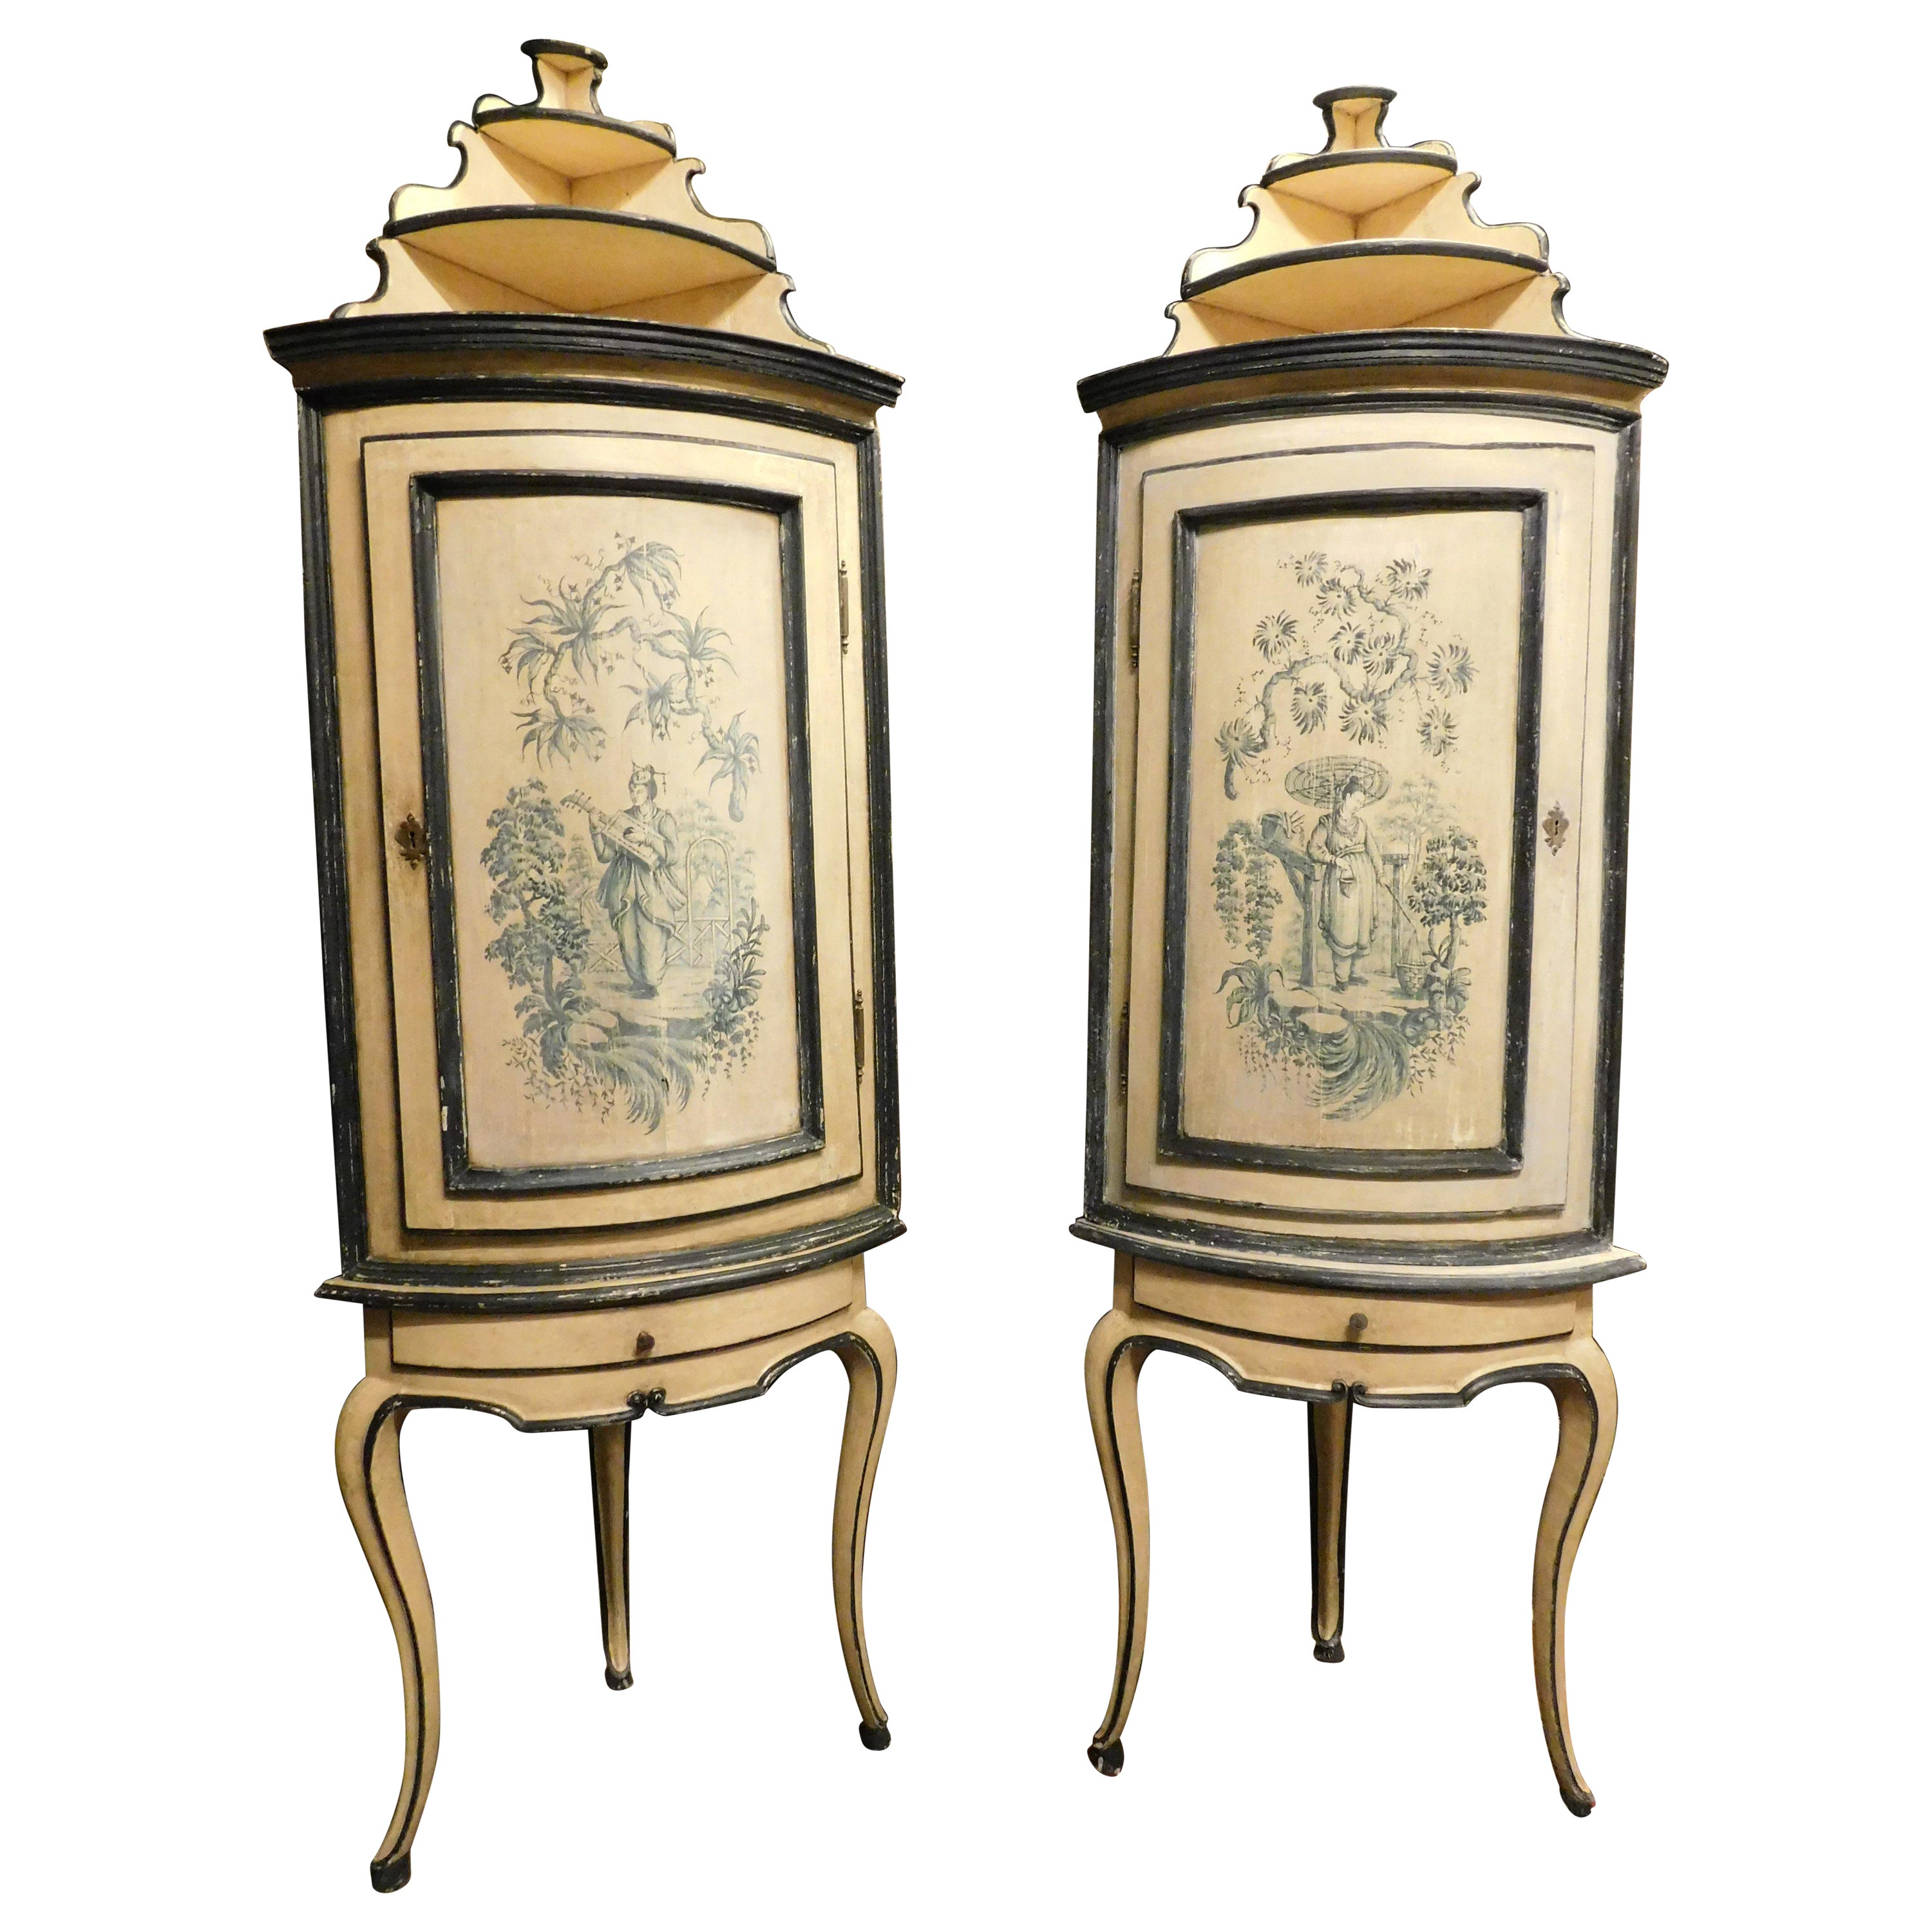 Antique Pair of Corner Cabinets in Lacquered Wood with chinoiserie, 18th Century For Sale